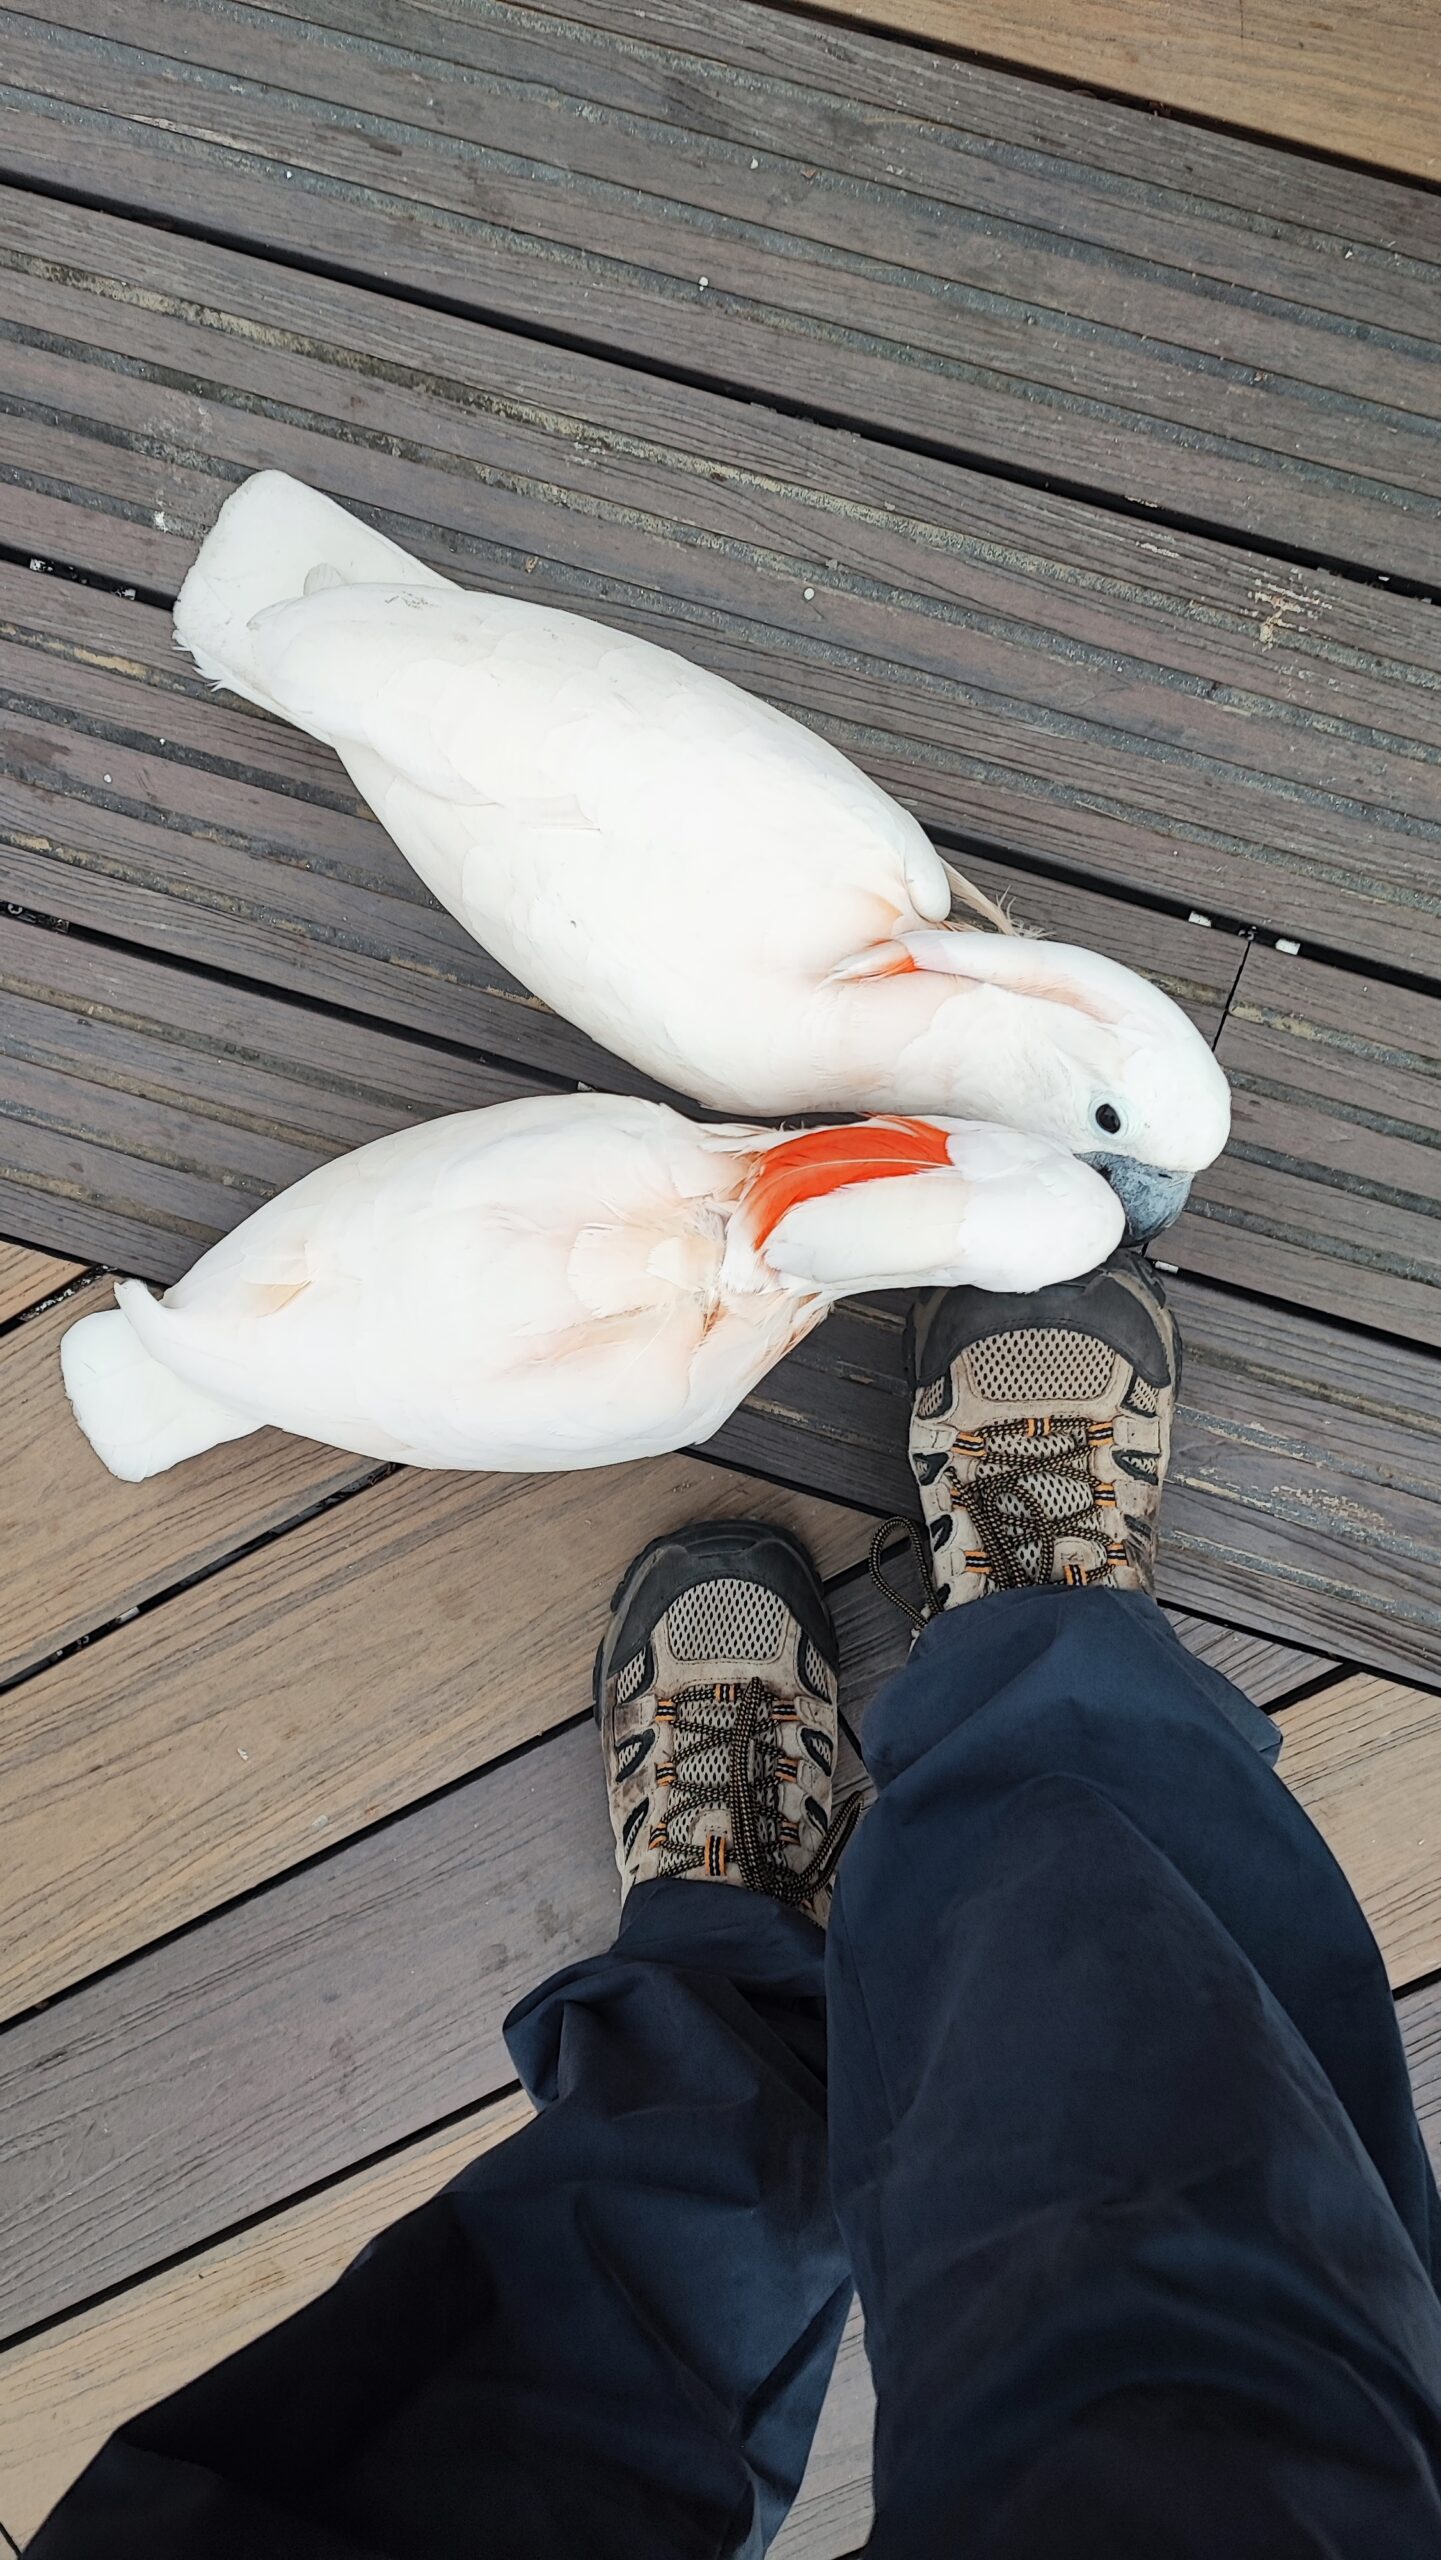 Two cockatoos, white with orange crest, pecking a brown shoe. Conservation southeast asia. Credit: Mike Baltzer